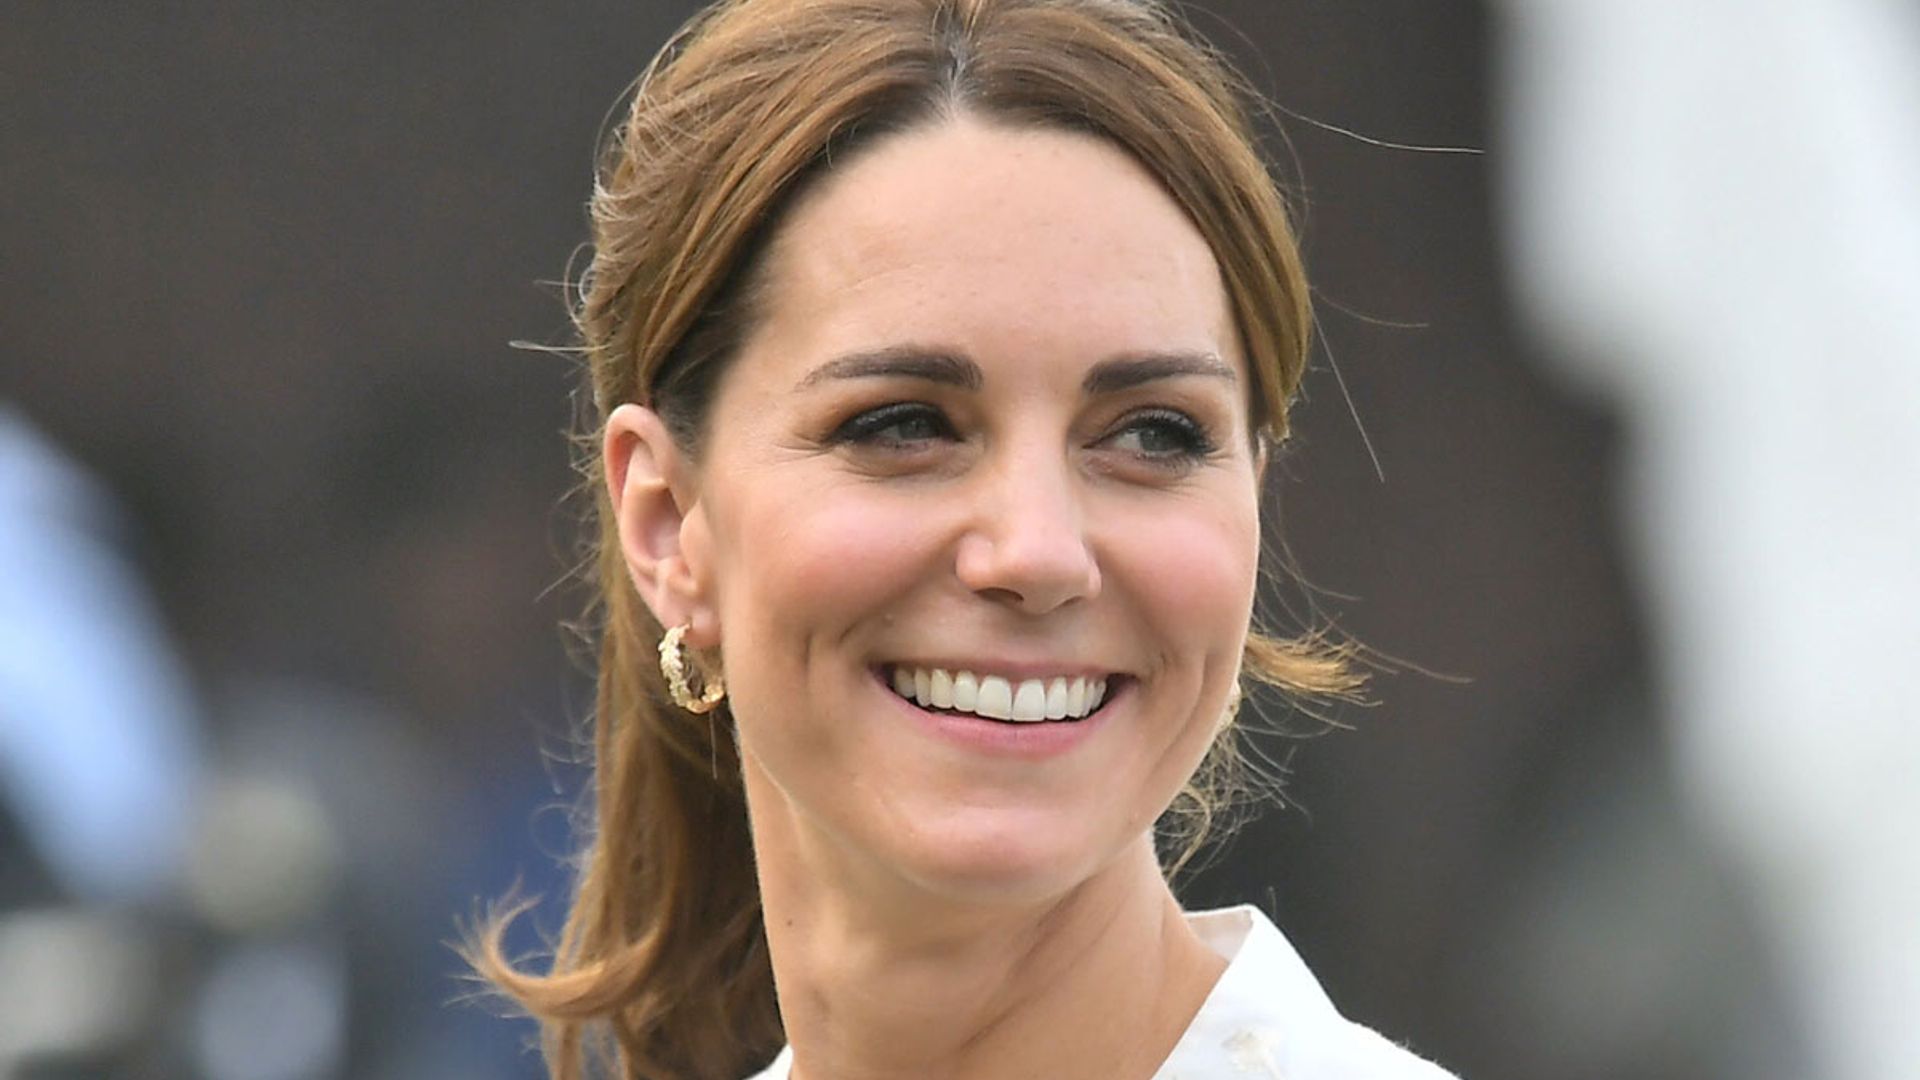 Kate Middleton makes a serious style statement with striking patterned blouse